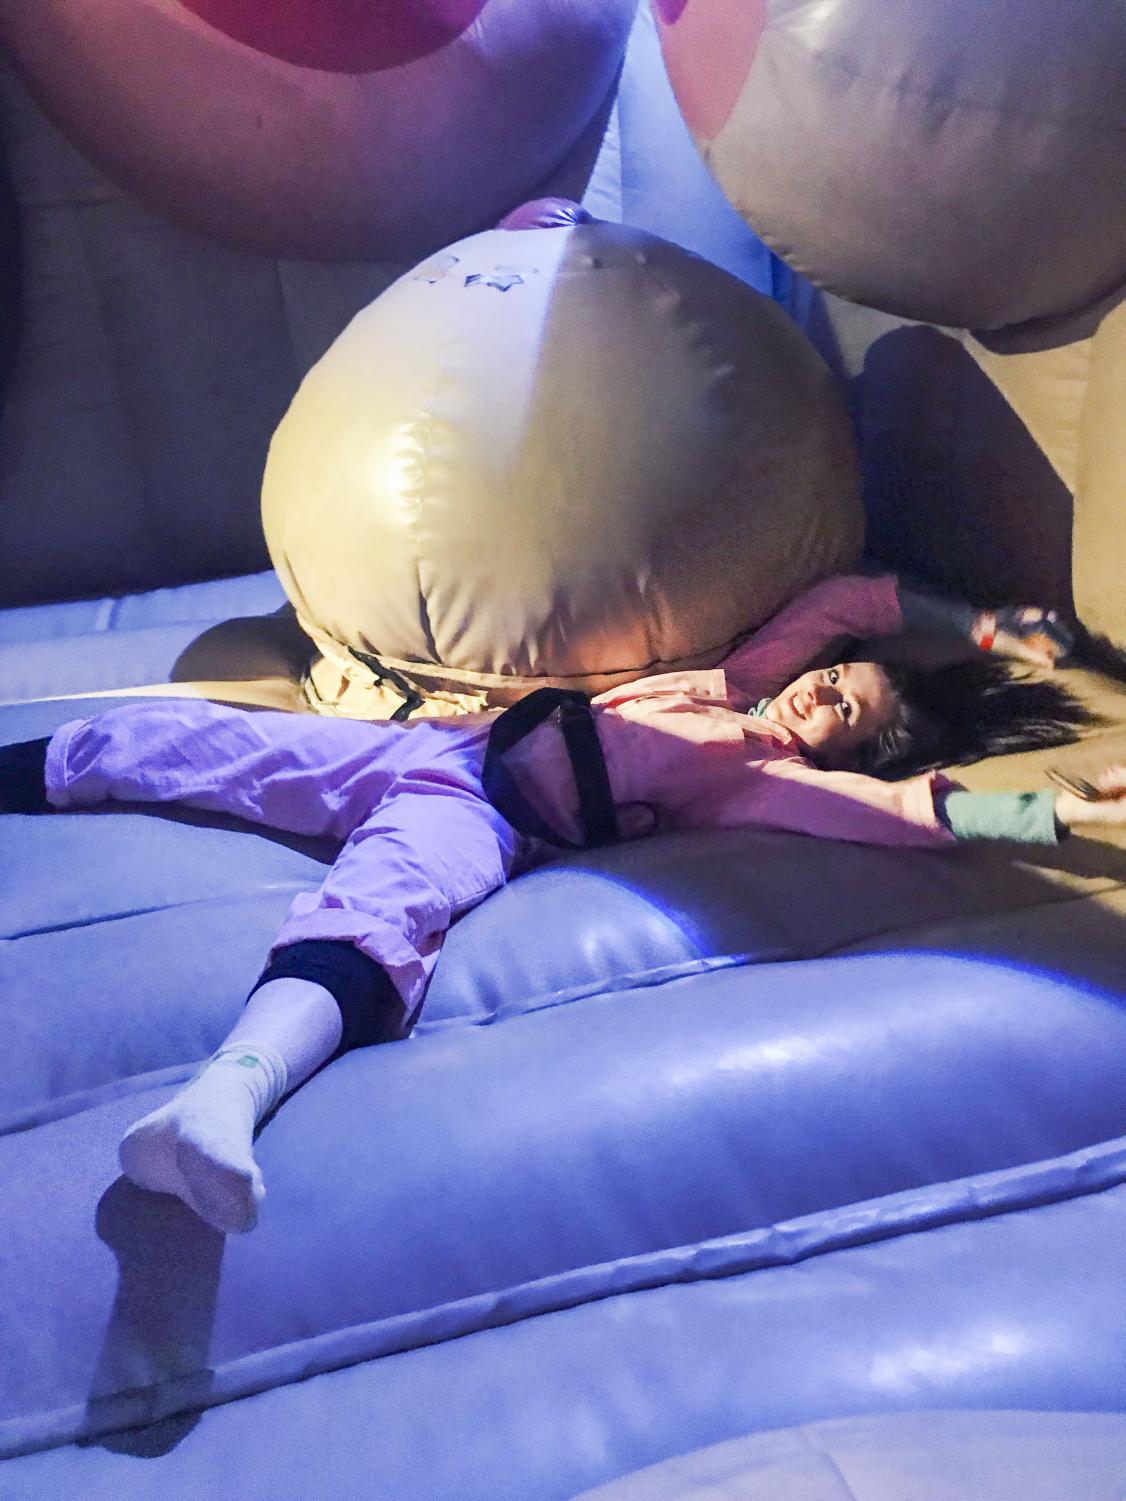 Had a blast in the titty bounce house. I fell right at home lmaoo